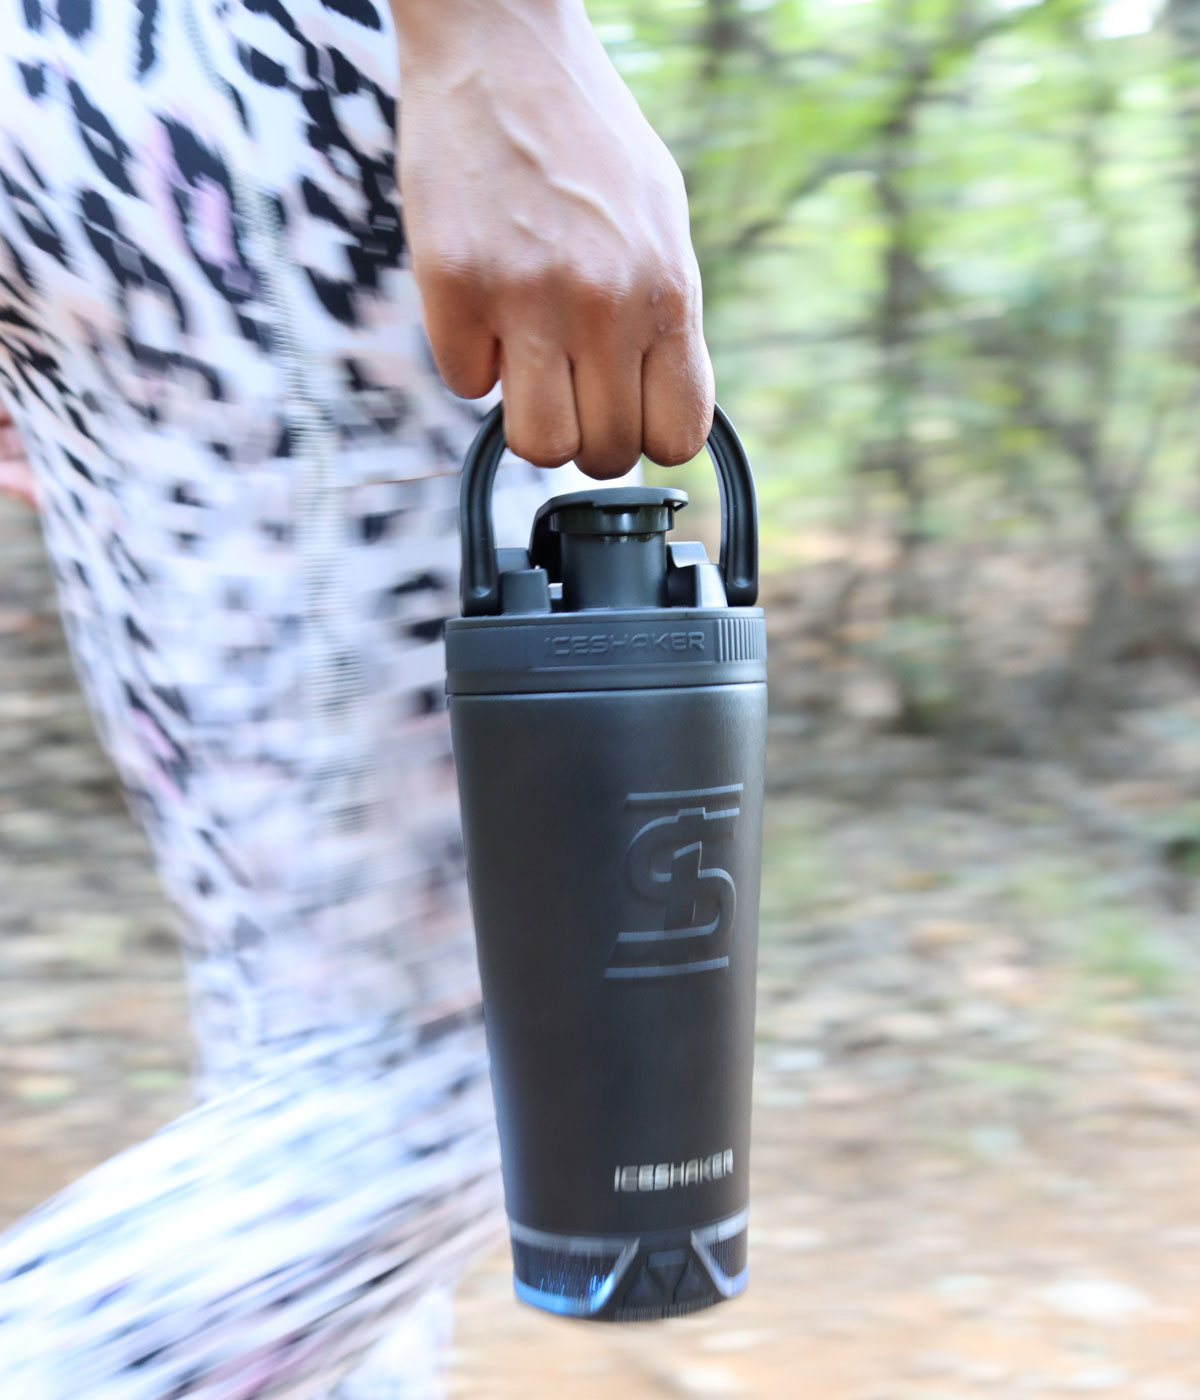 an image of the black 20oz Speaker Bottle being held by it's handle that's built into the lid. The speaker is lighting up blue which indicates that it is on.